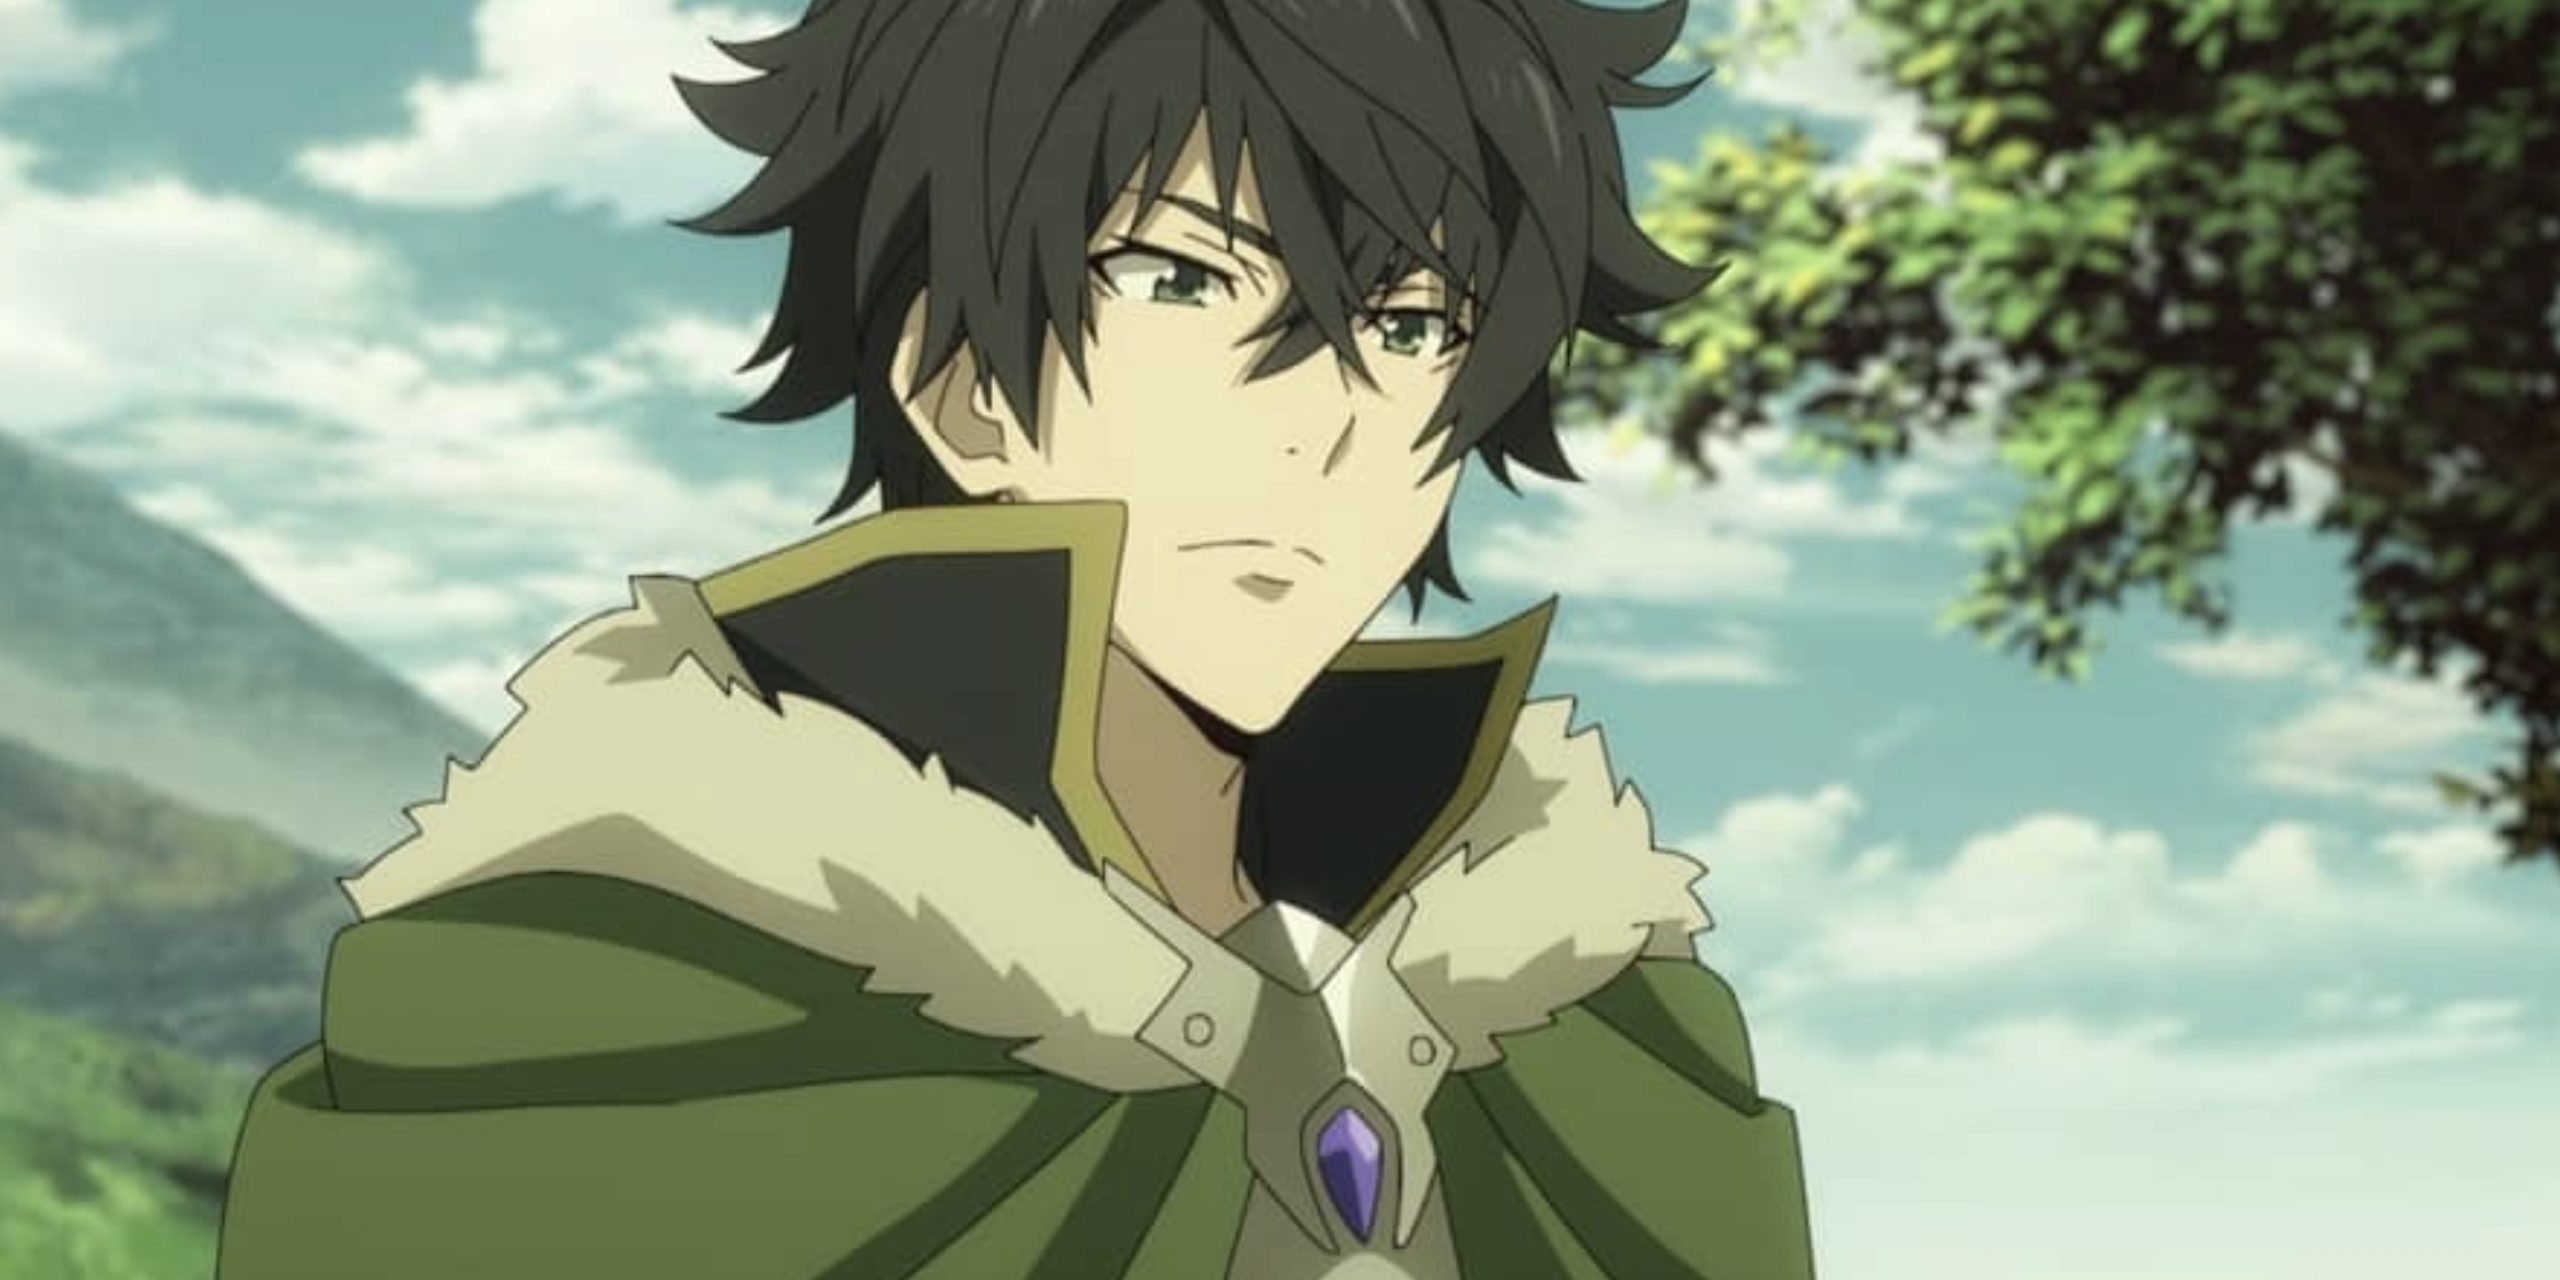 Why Is The Shield Hero Hated? Explained